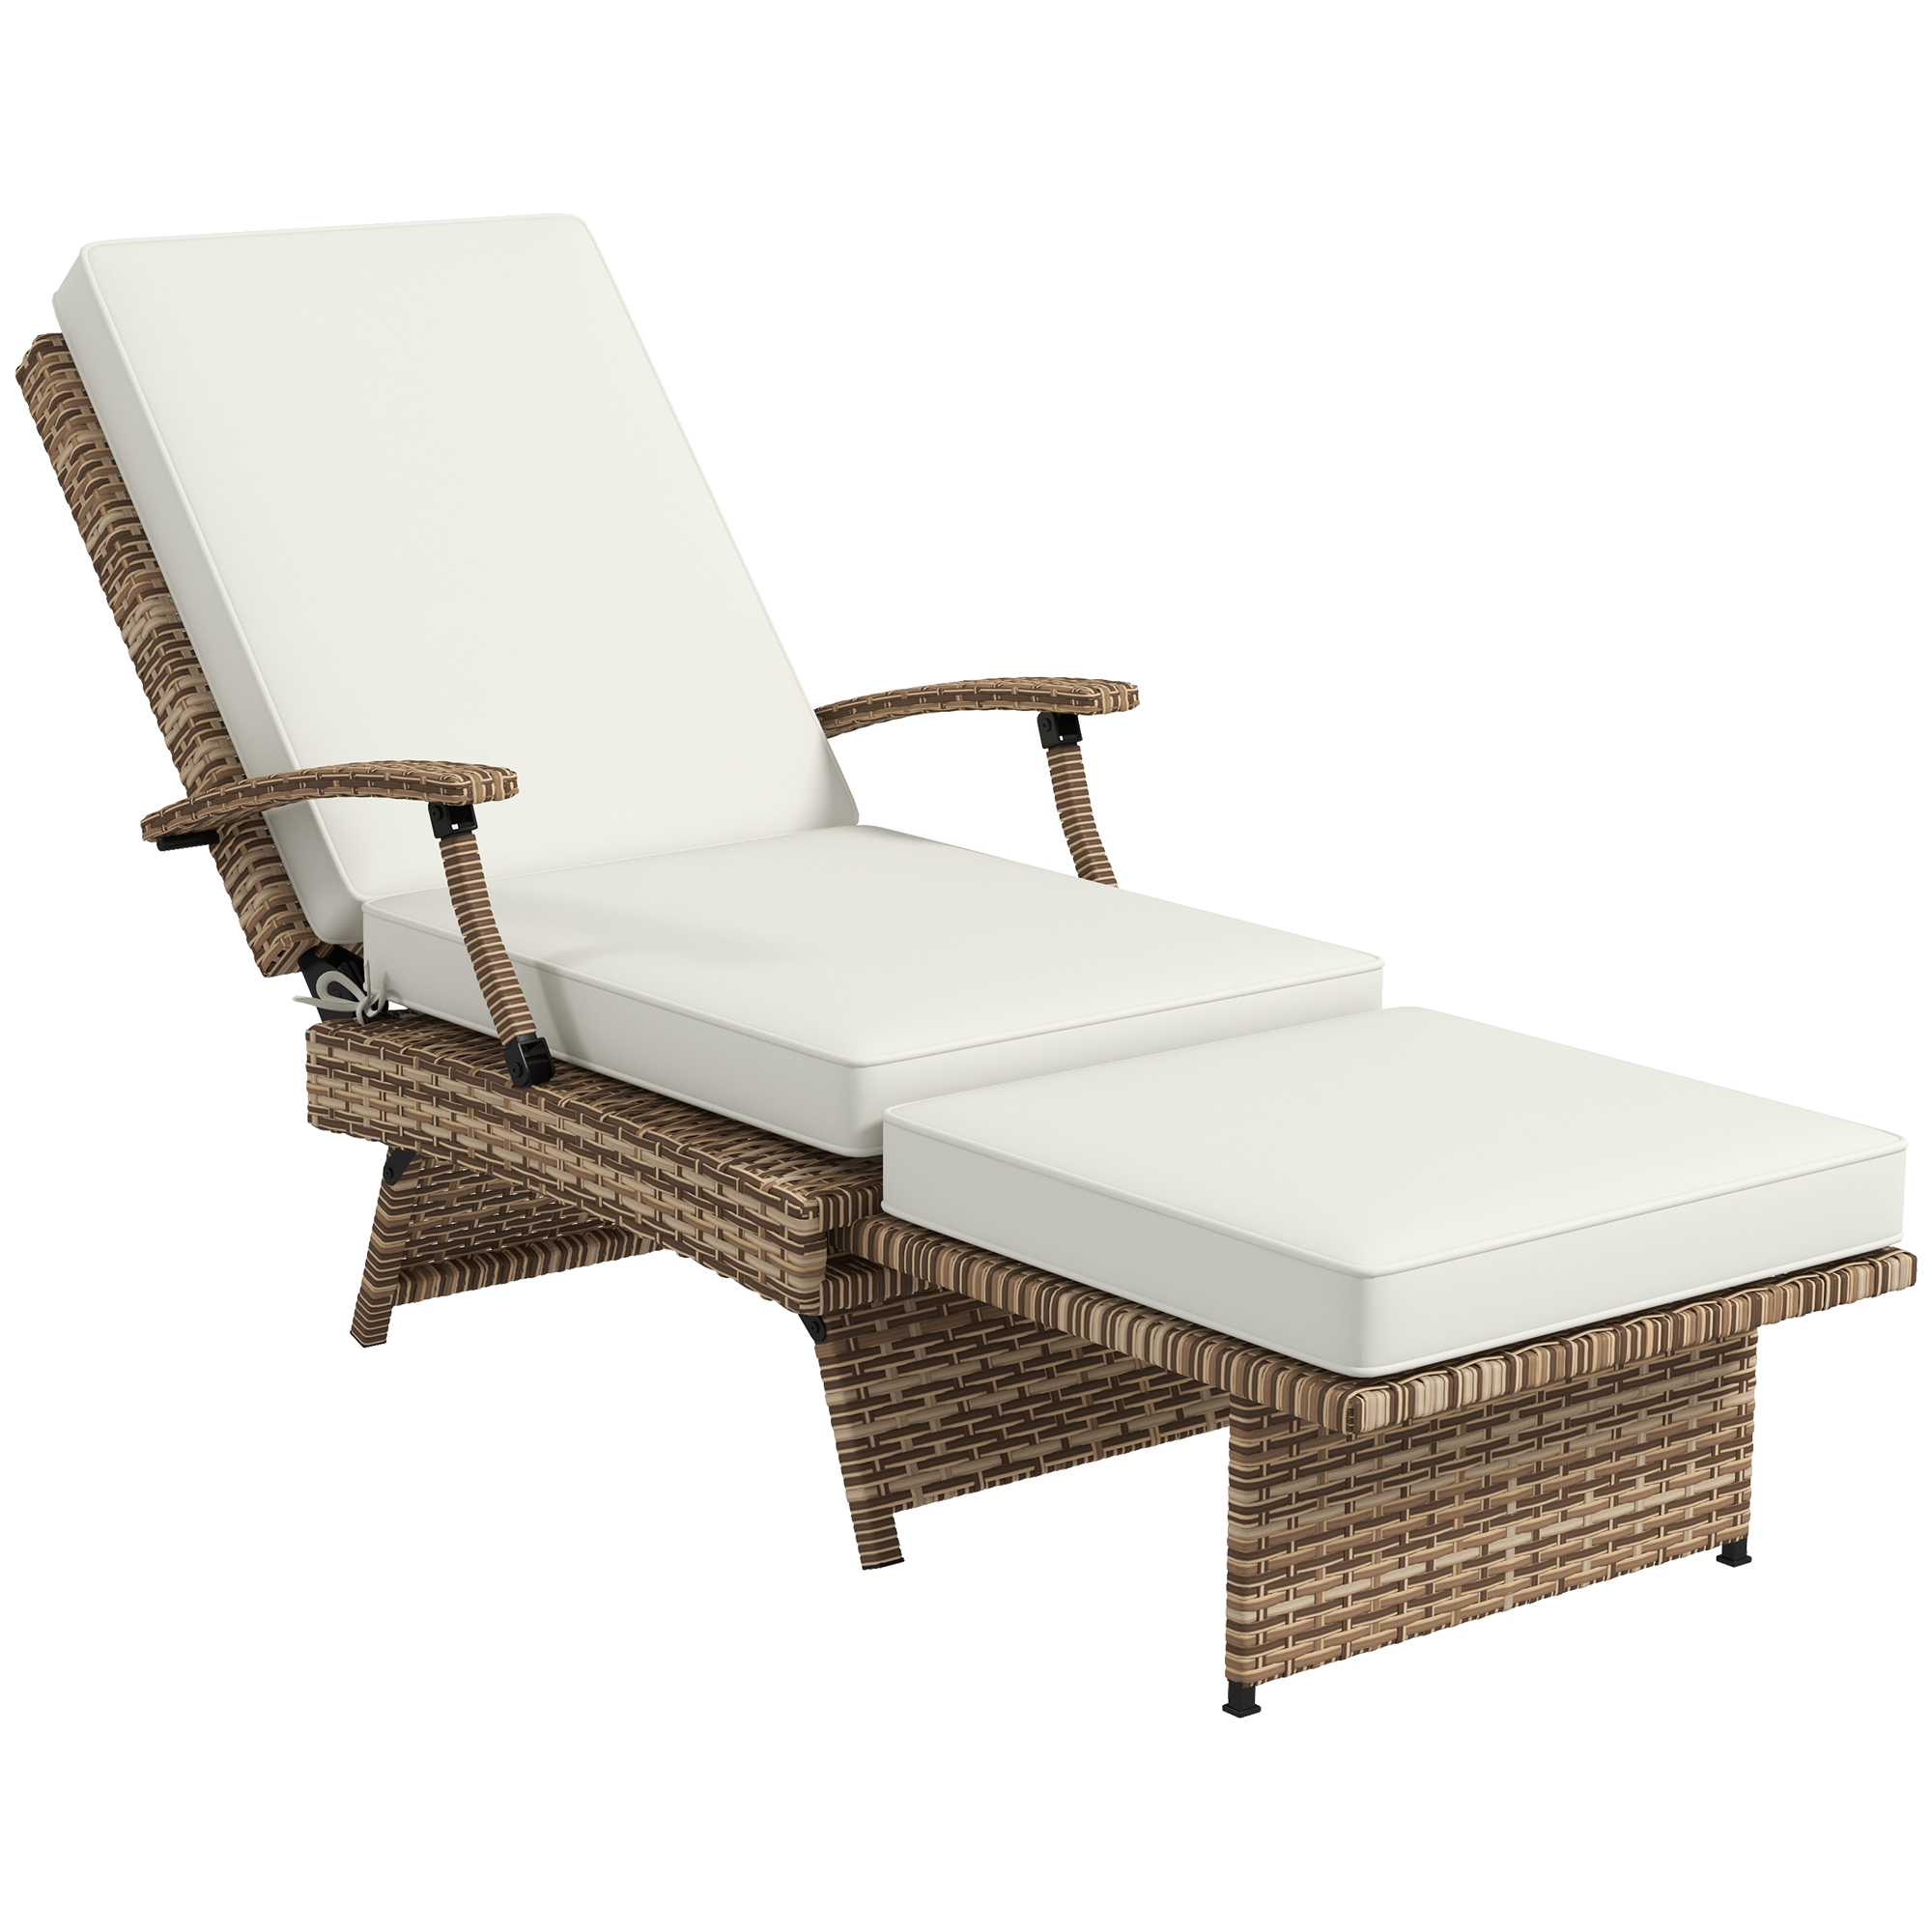 Outdoor PE Rattan Foldable Recliner Chair w/ Cushion, White